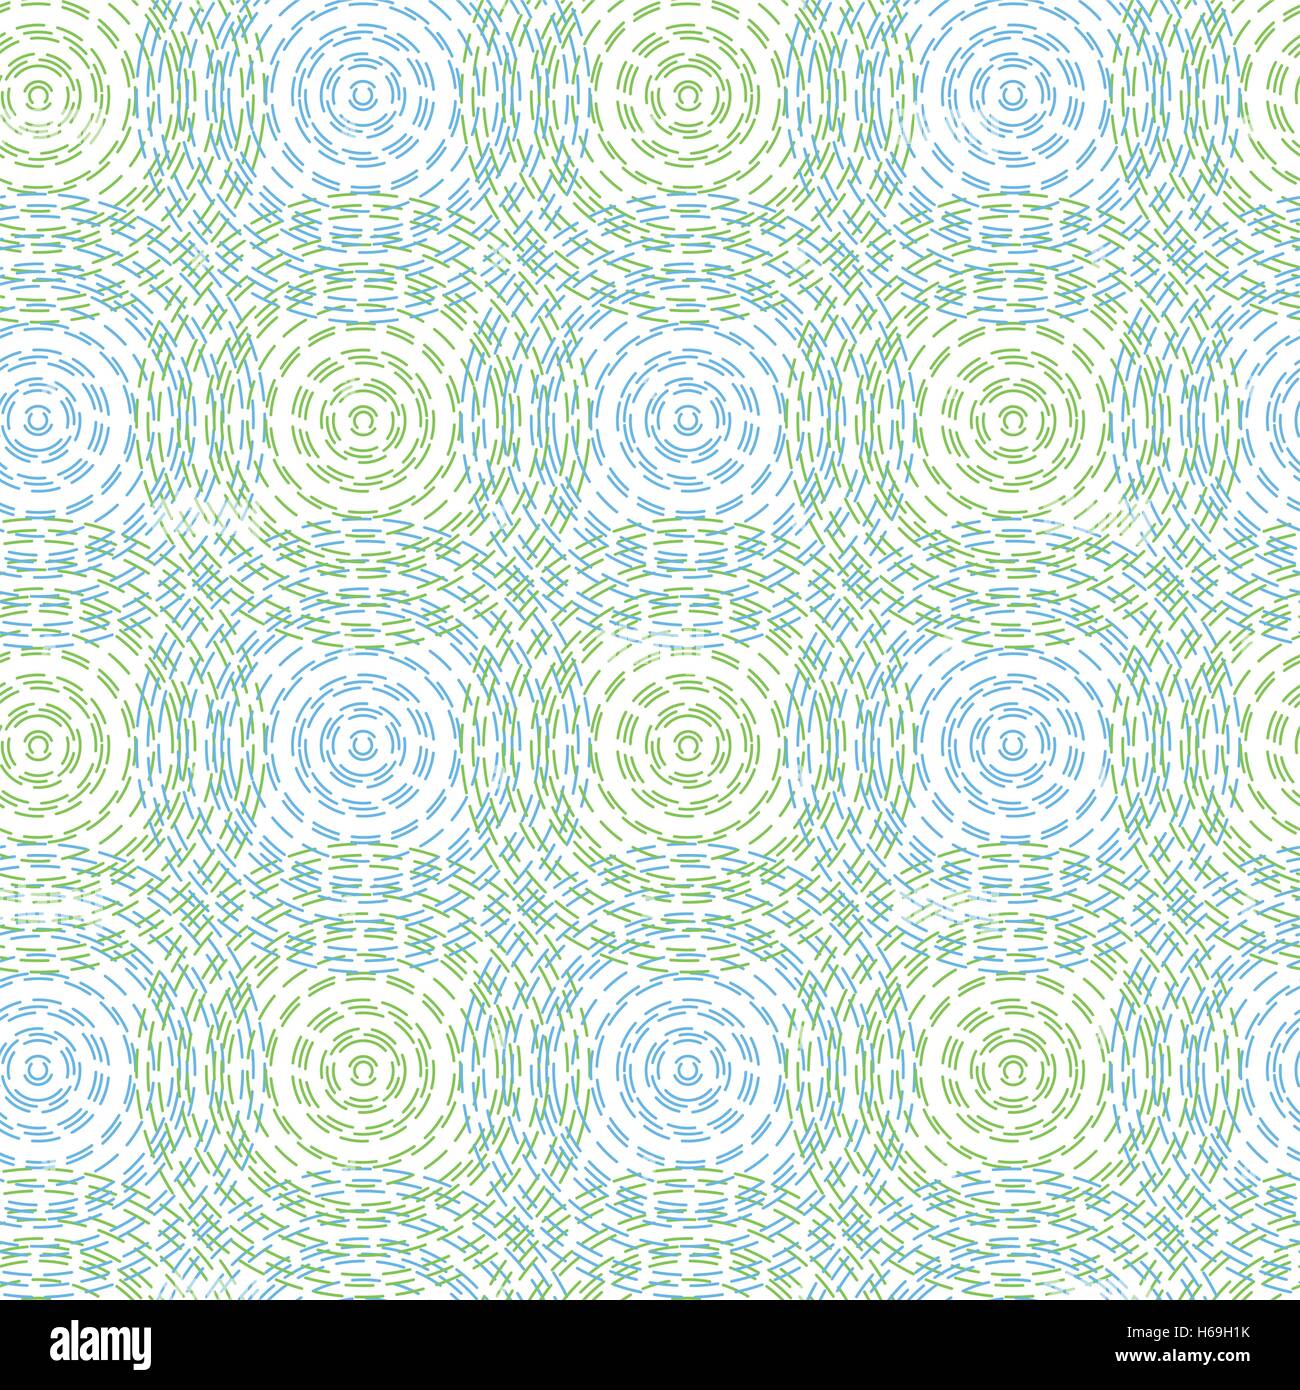 vector seamless background pattern of abstract circles Stock Vector